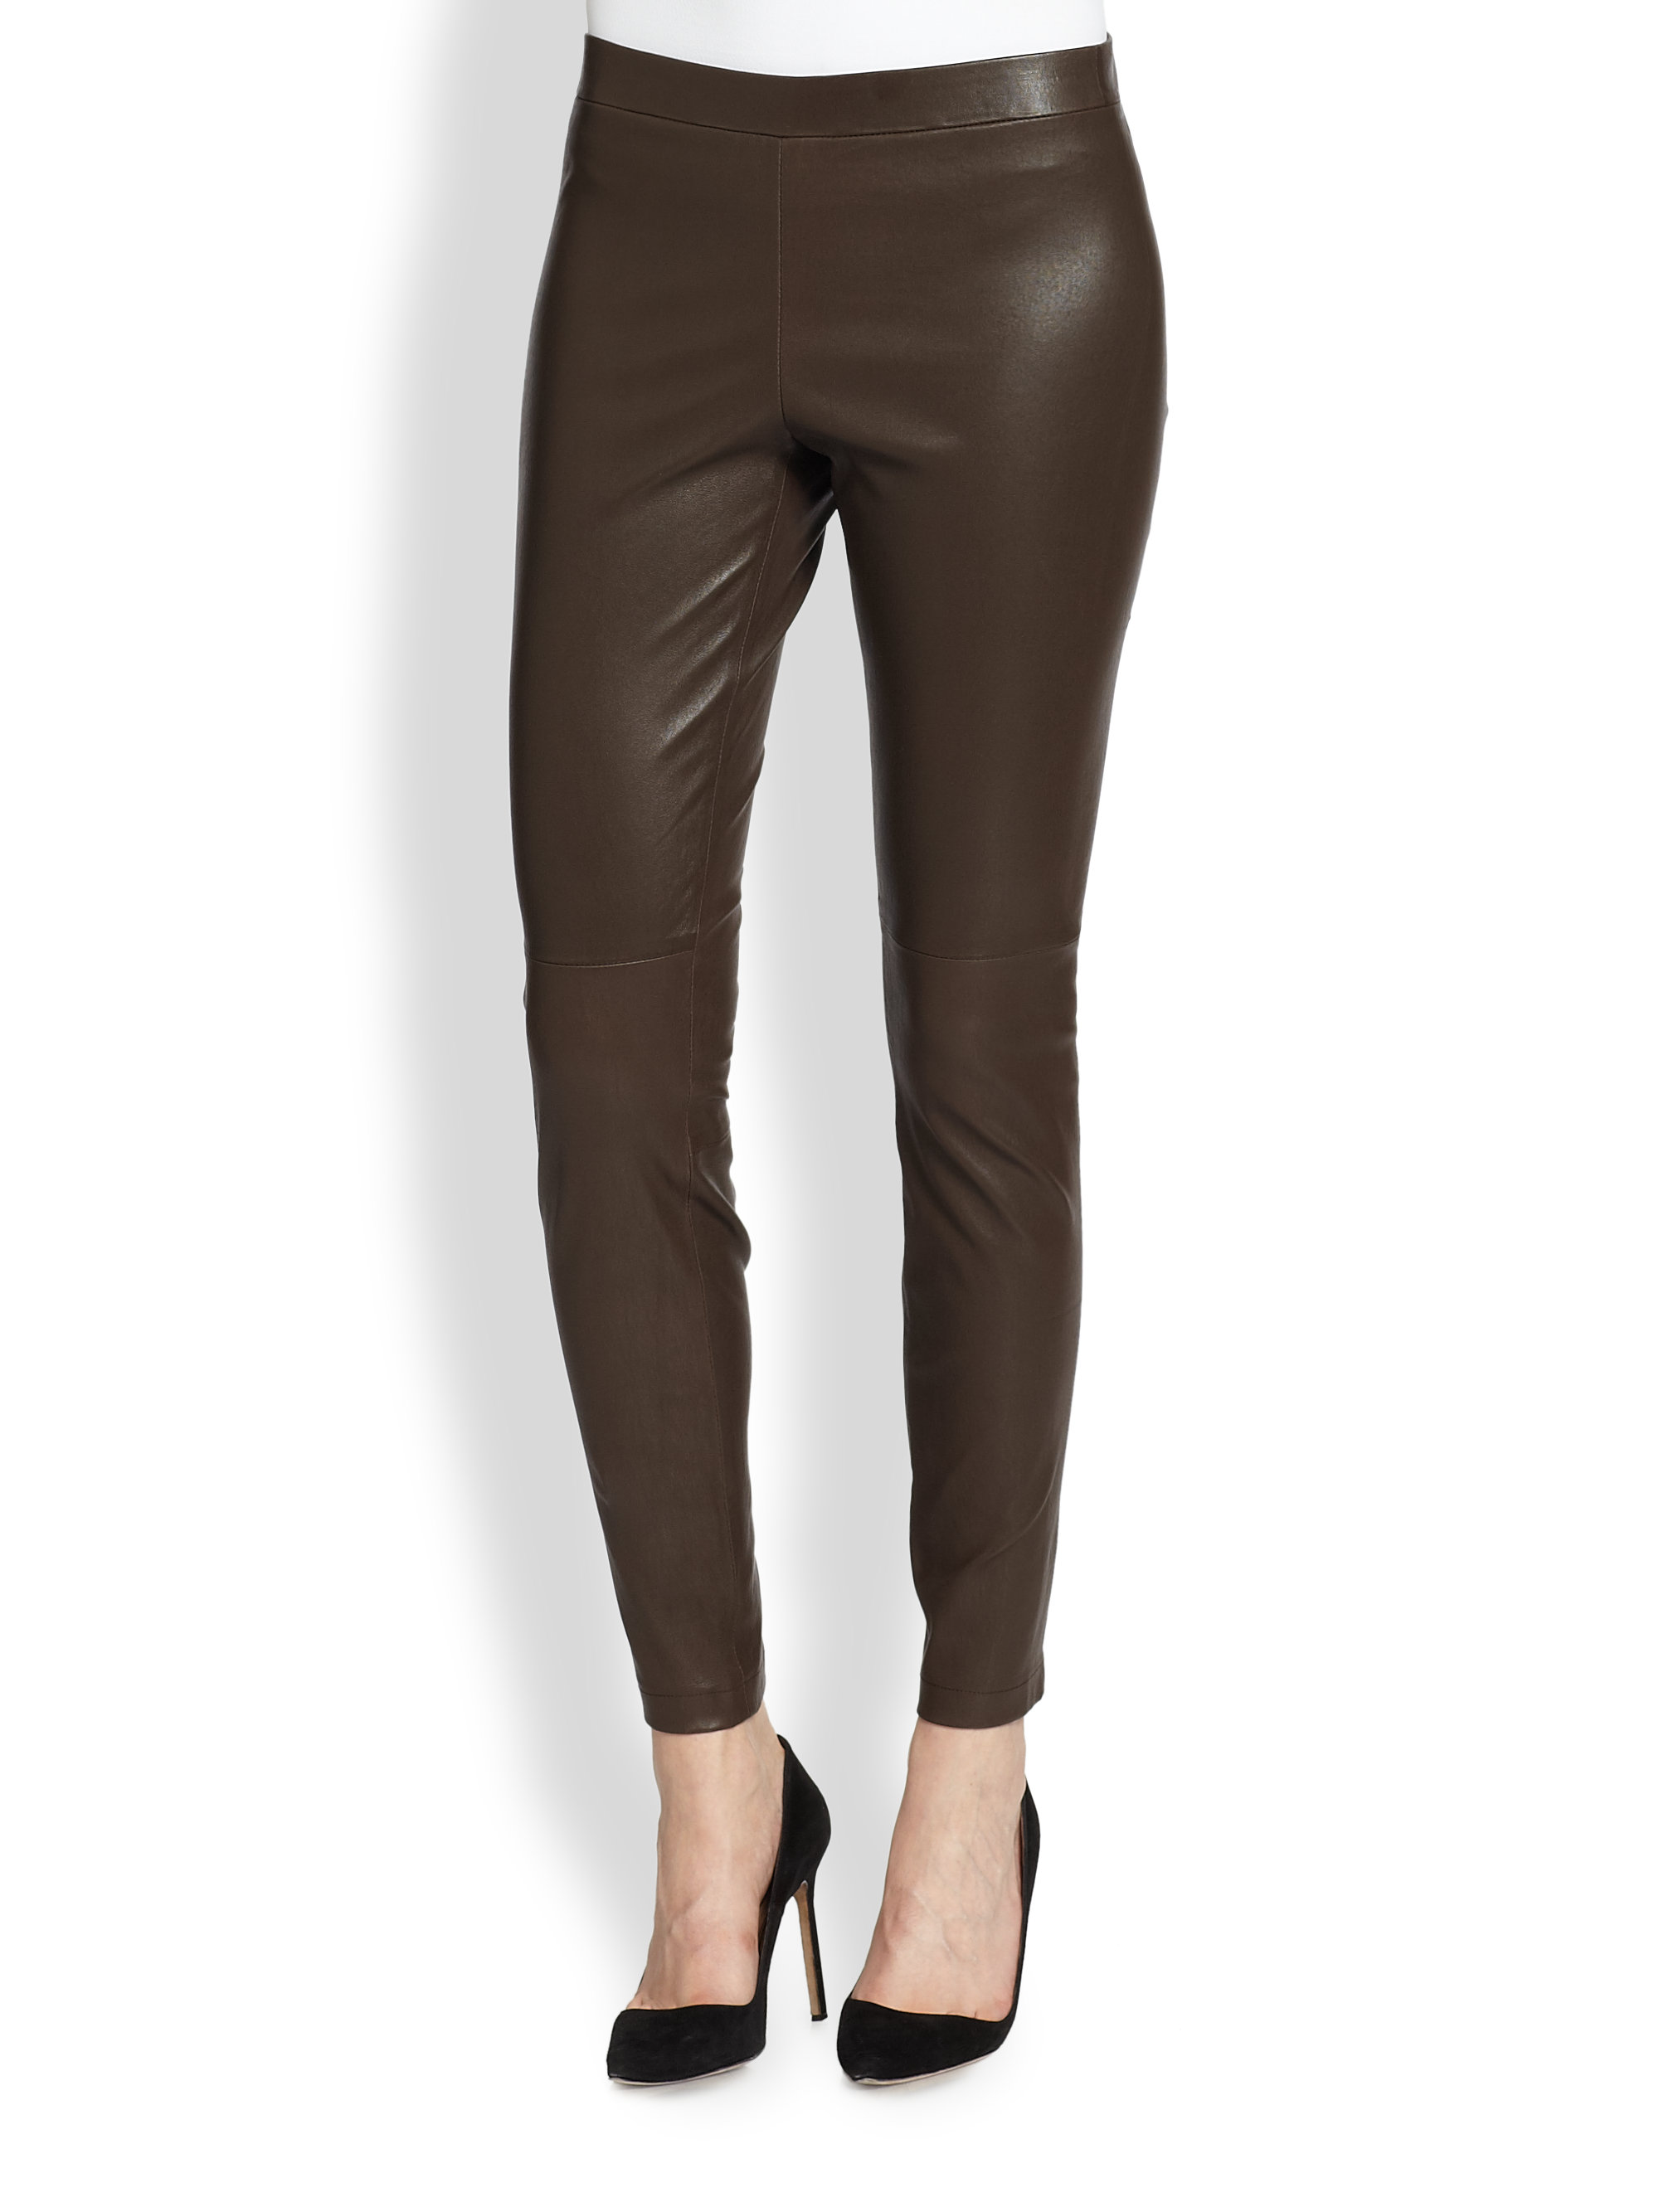 Brown Leggings Fashion Ideascale  International Society of Precision  Agriculture